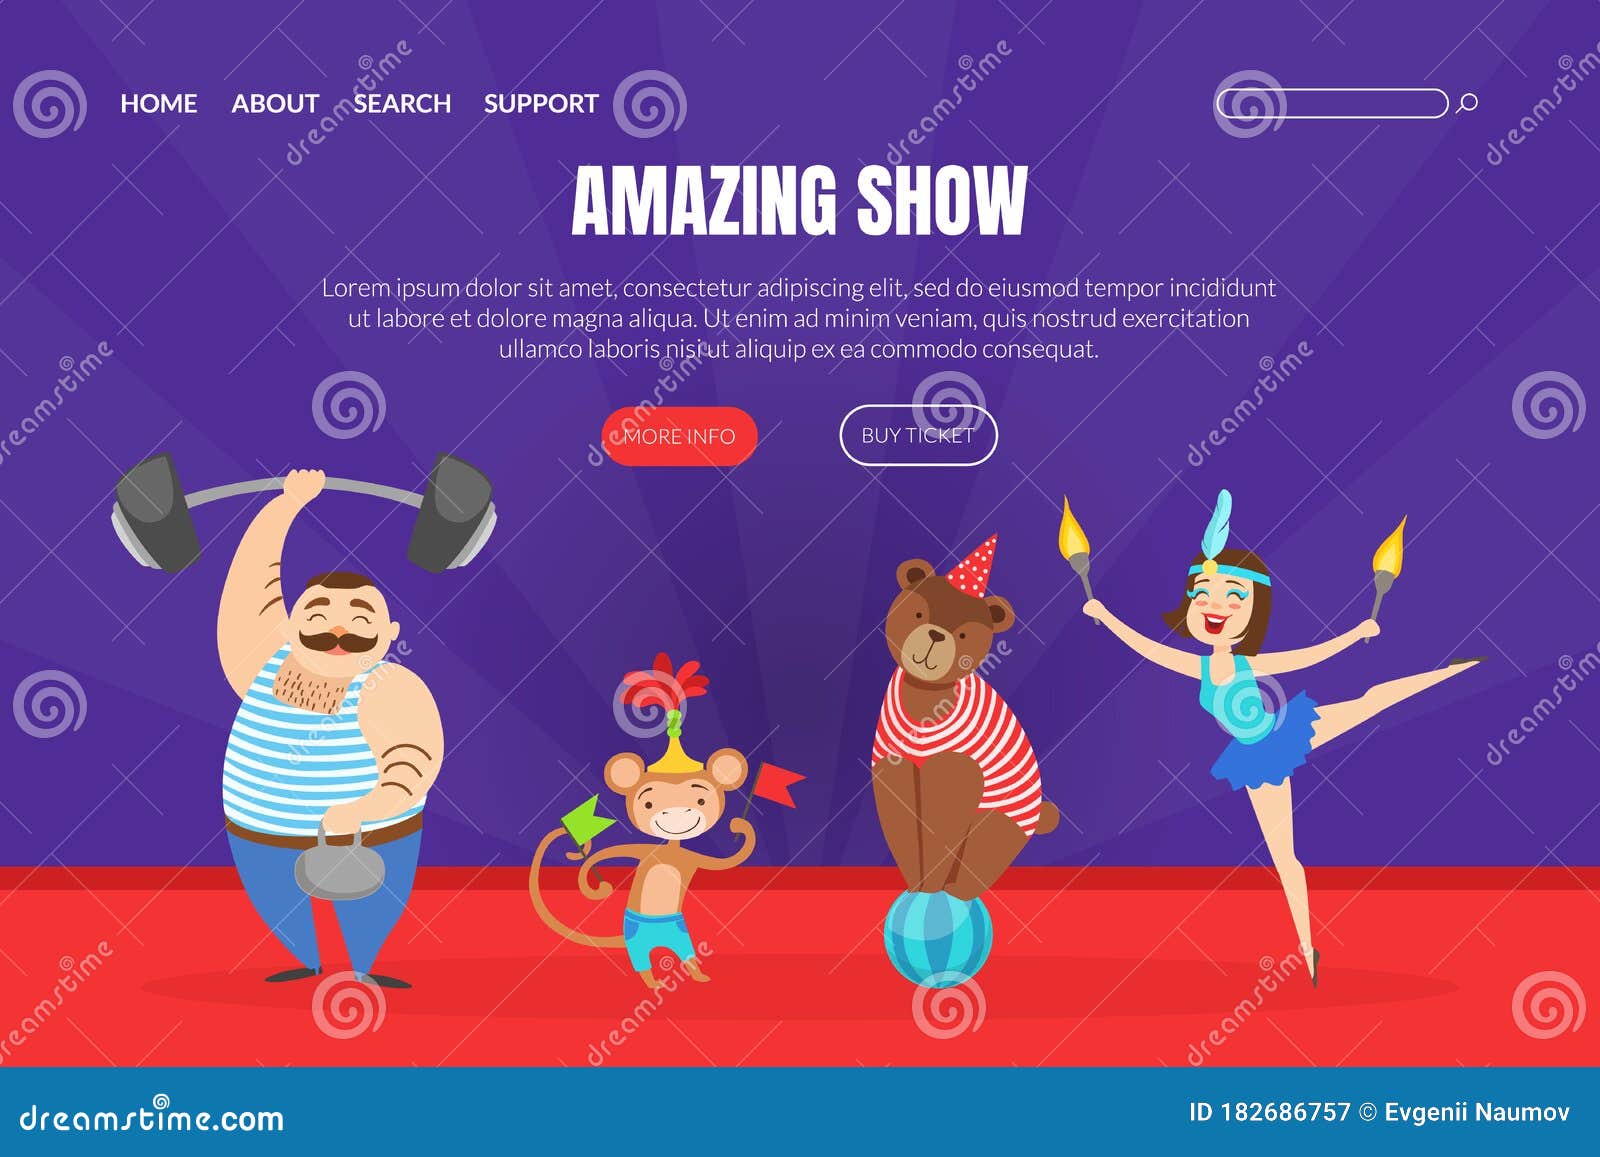 Amazing Show Landing Page Template, Circus Performance Web Page, Mobile App,  Homepage Vector Illustration Stock Vector - Illustration of flat, costume:  182686757